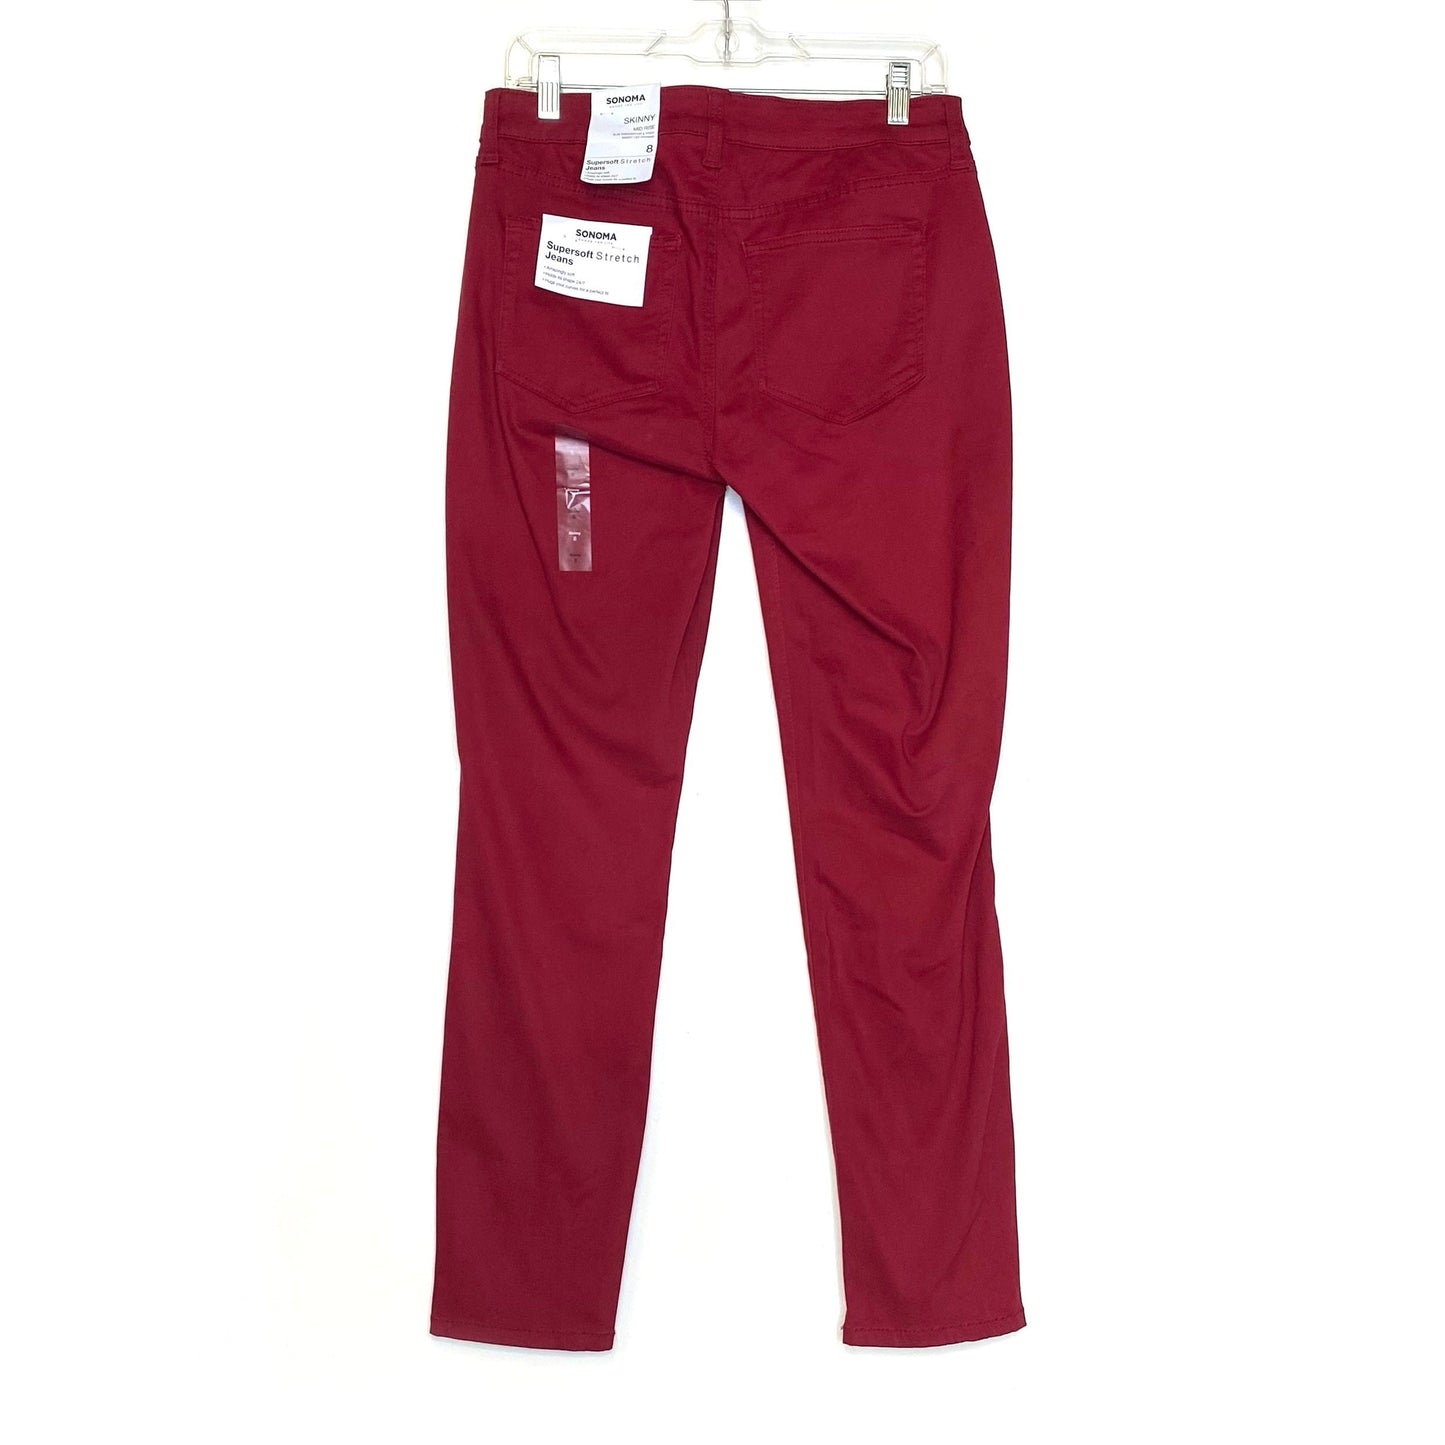 Sonoma Womens Supersoft Stretch Skinny Jeans 8 Red Denim Mid Rise NWT